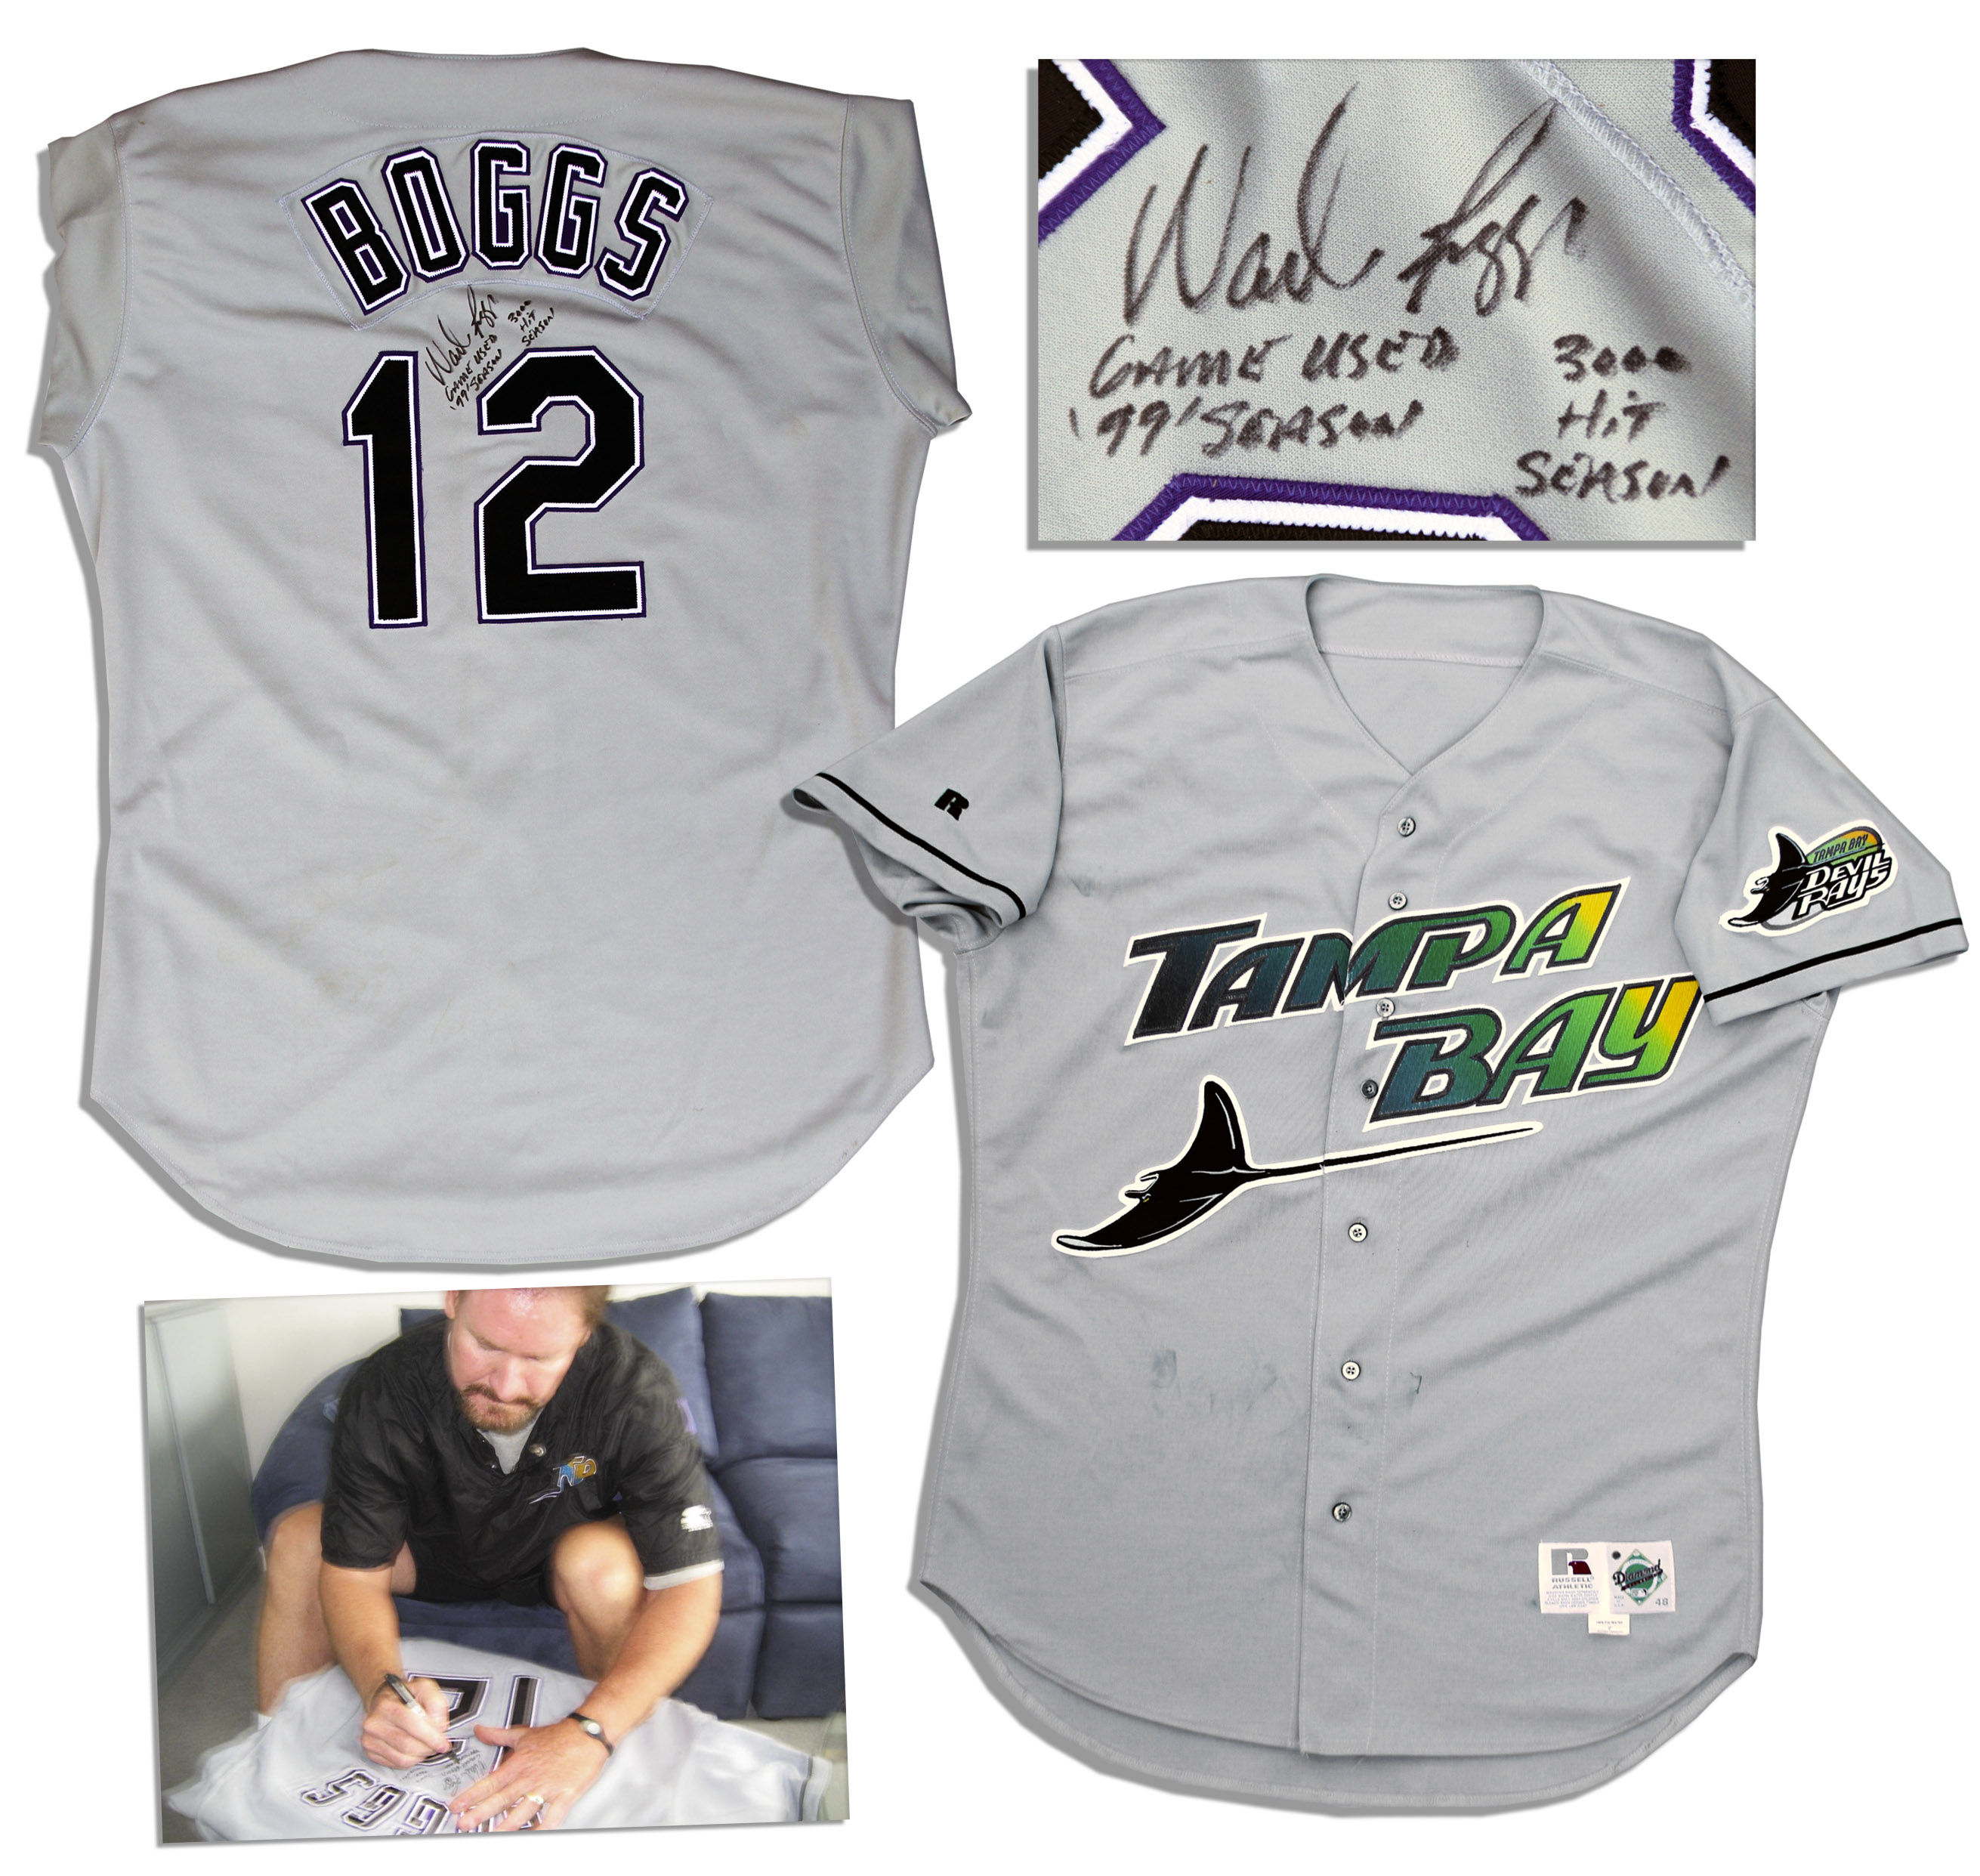 wade boggs rays jersey